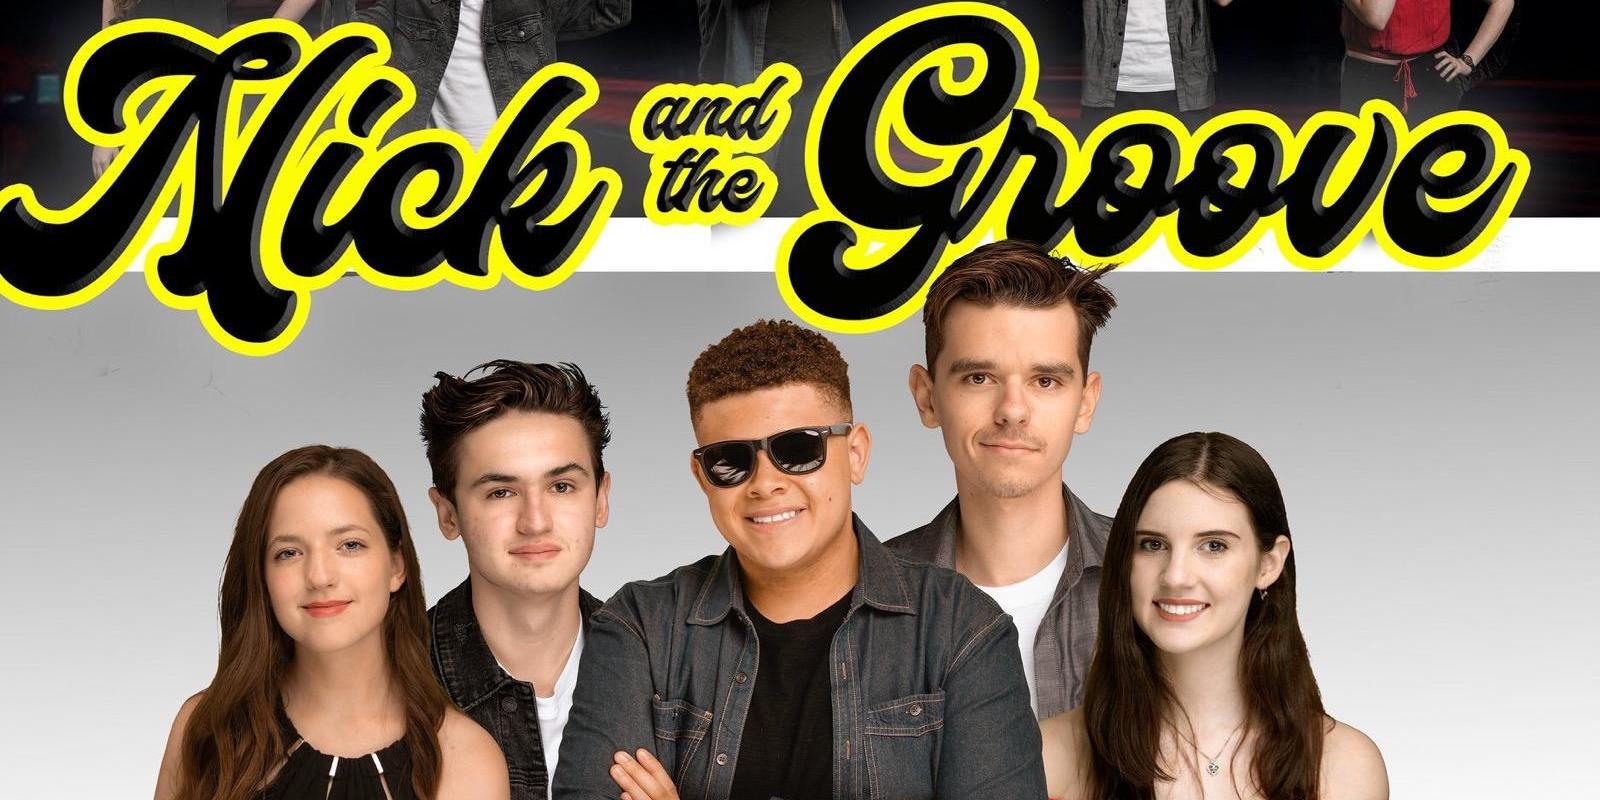 Nick and the Groove at Back Porch Grill promotional image